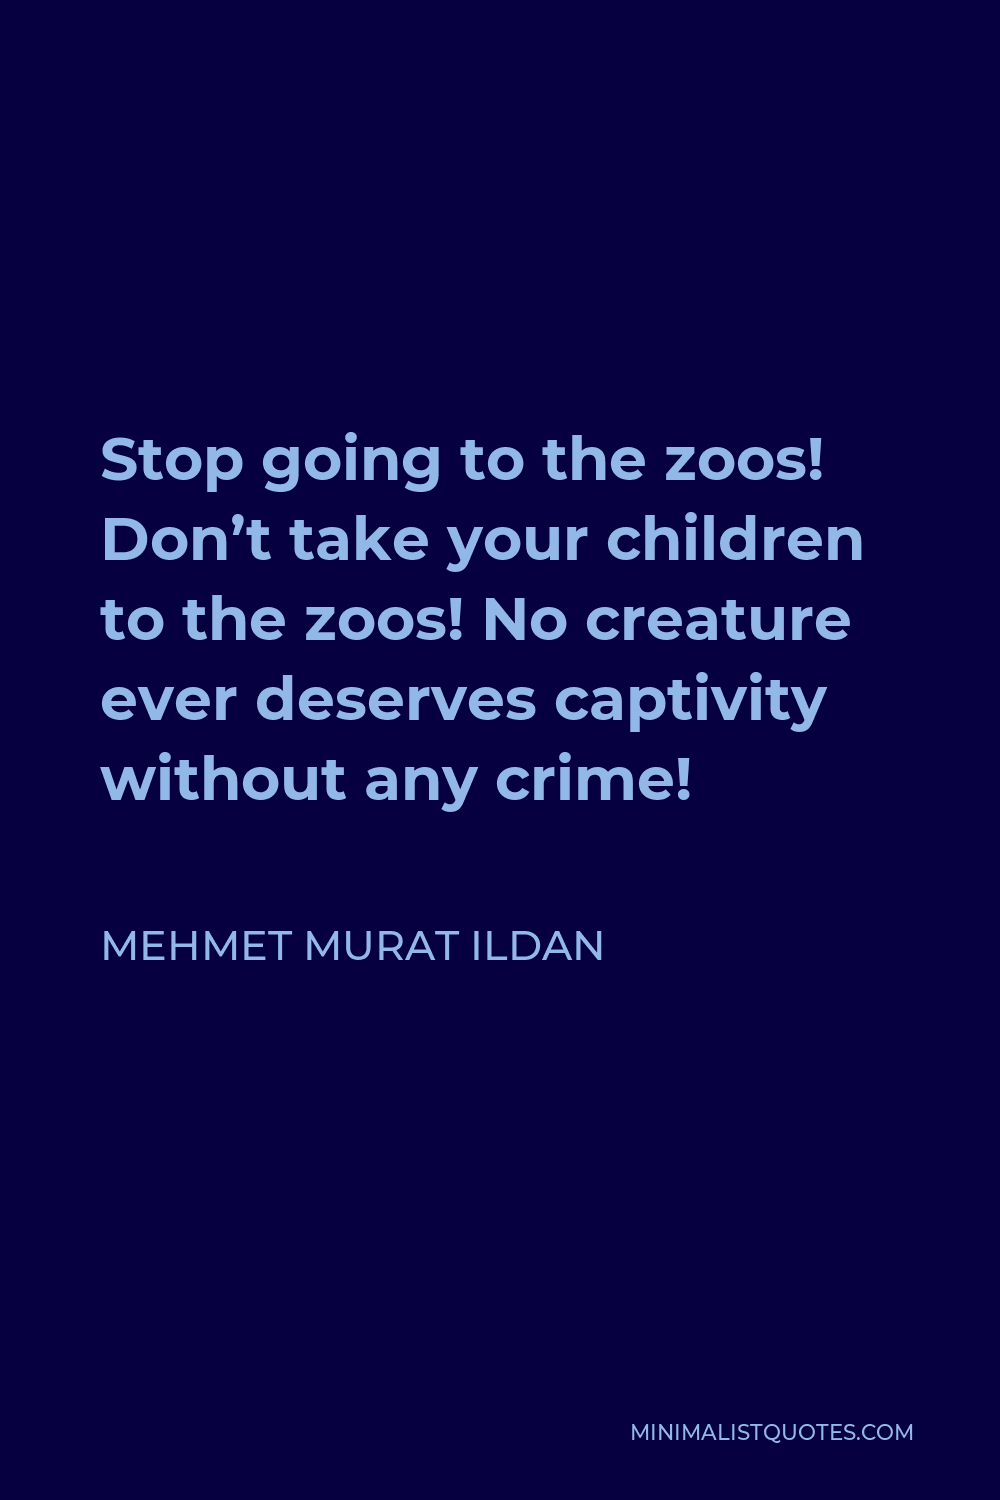 Mehmet Murat Ildan Quote - Stop going to the zoos! Don’t take your children to the zoos! No creature ever deserves captivity without any crime!